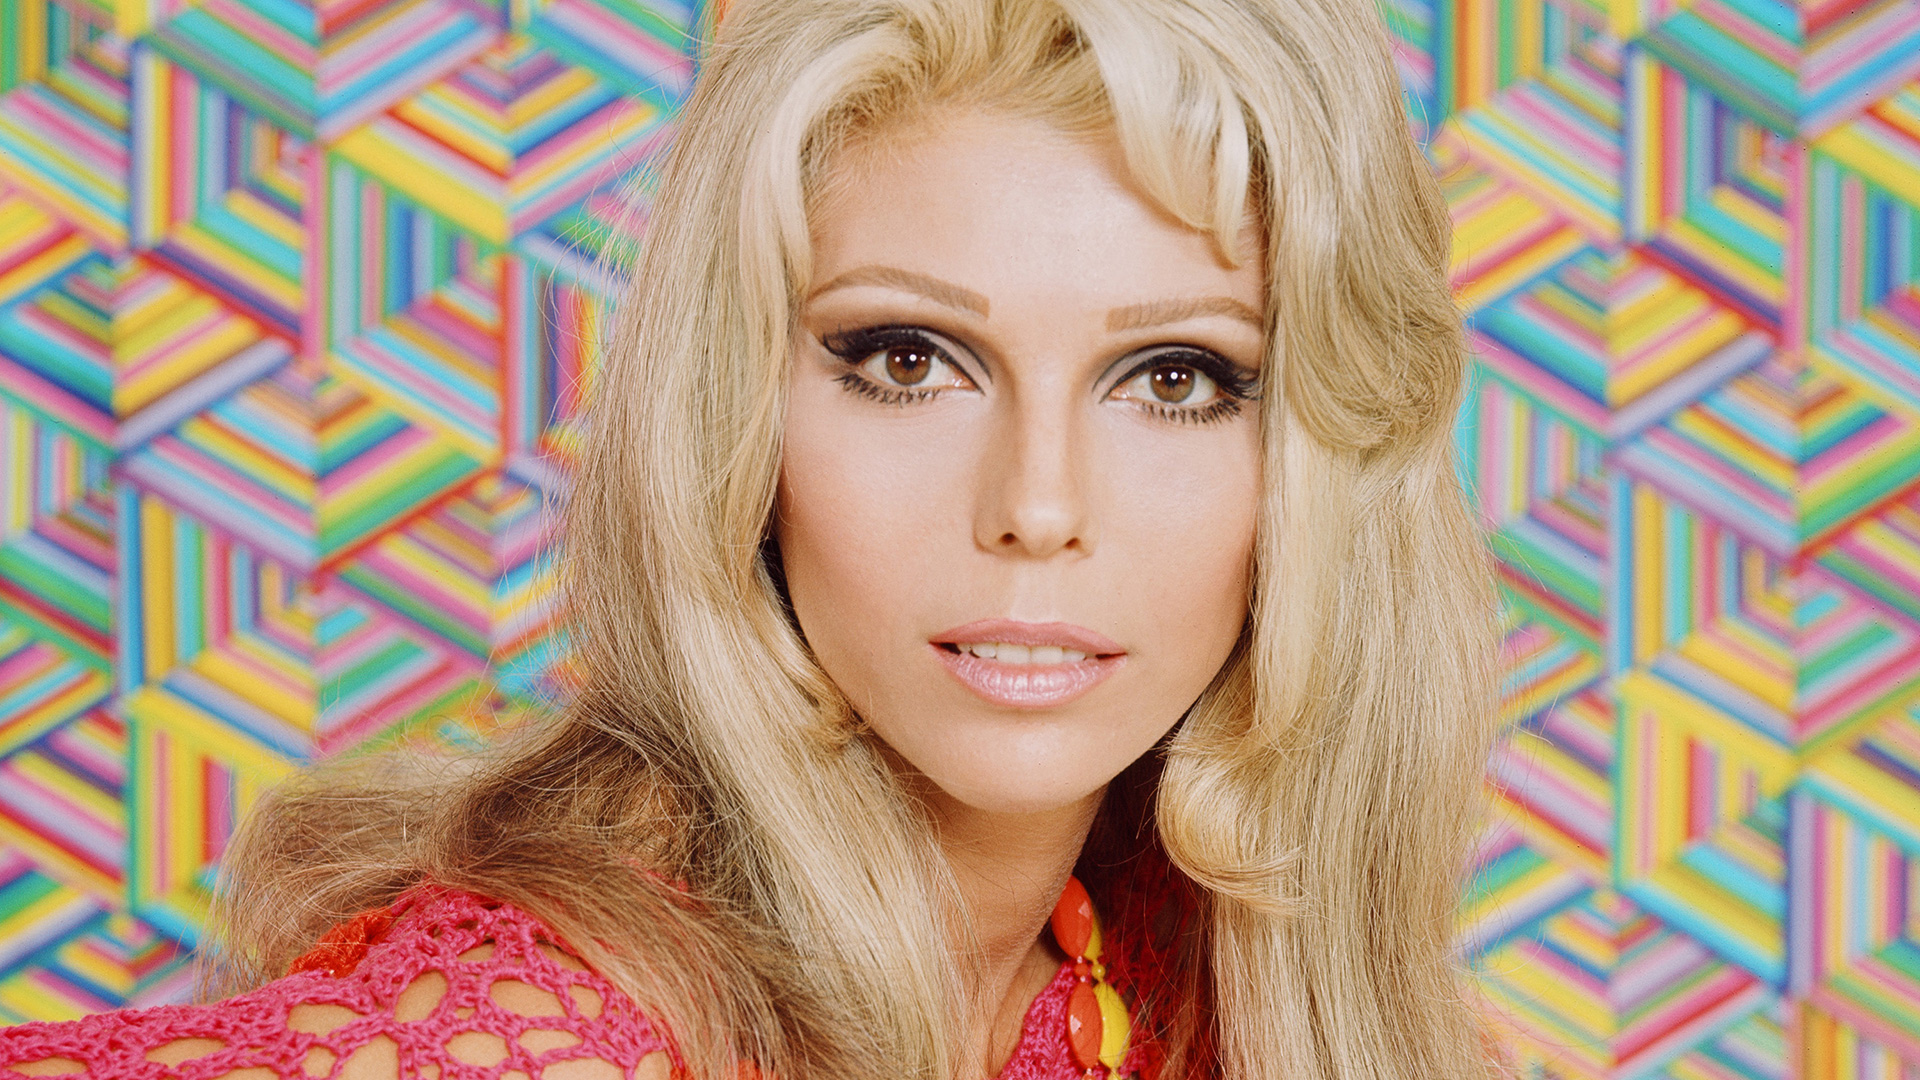 February 26, 1966: "These Boots Are Made for Walkin’" by Nancy Sinatra Hit No. 1 and Inspired a Generation of Independent Women